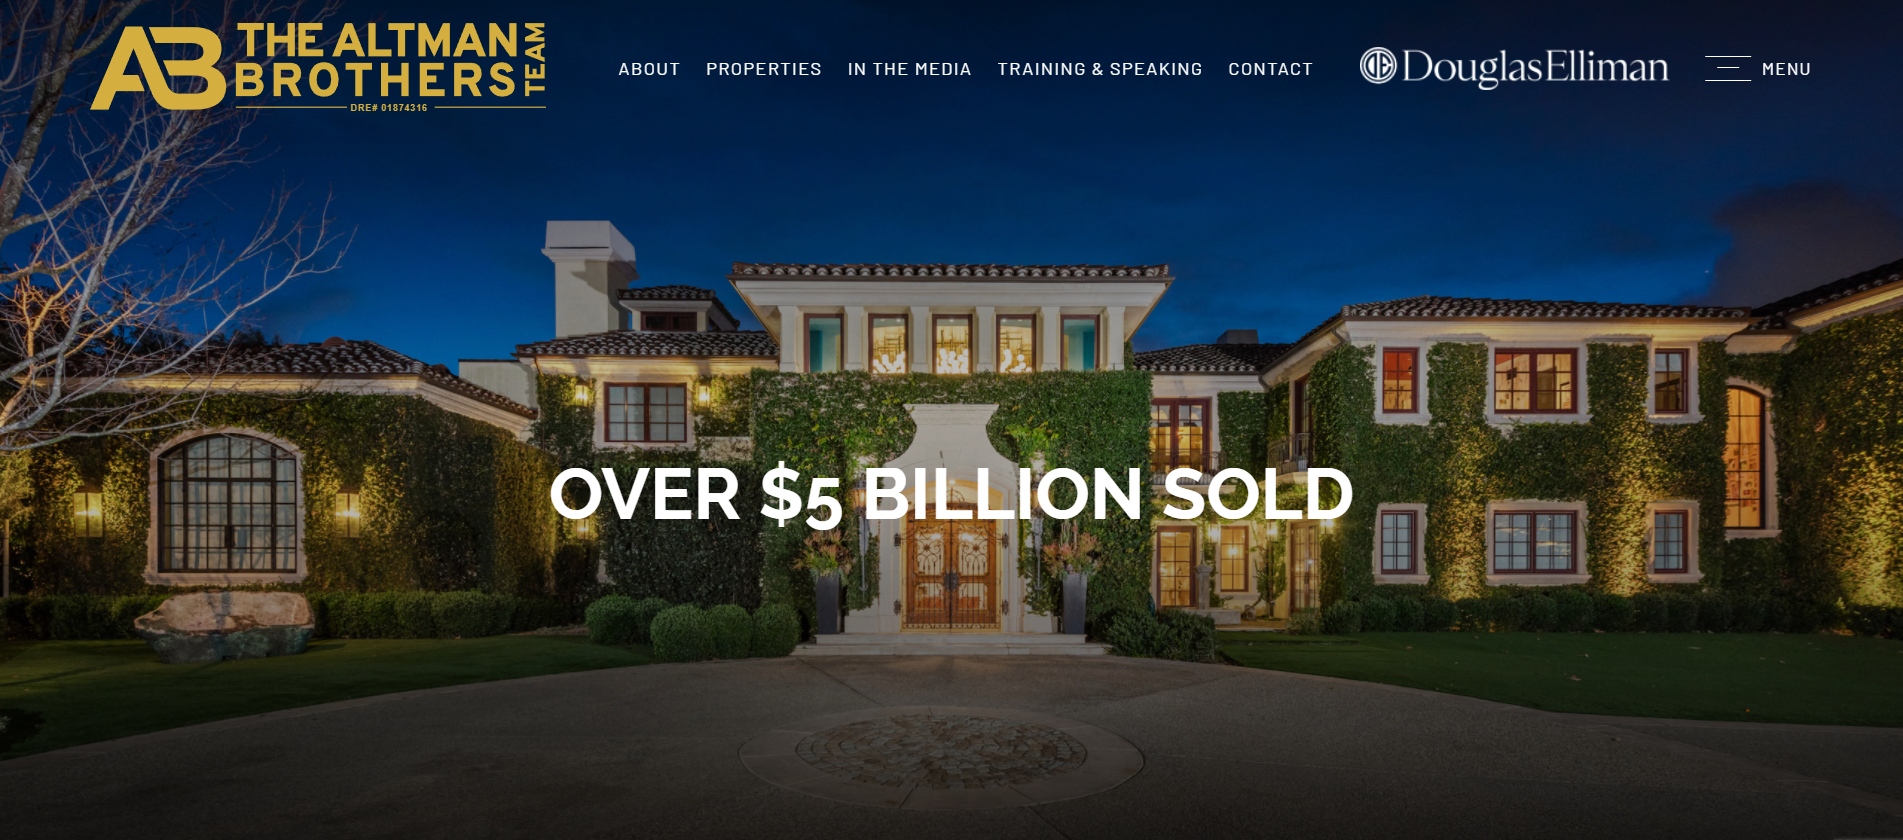 Beverly Hills, CA Luxury Real Estate - Homes for Sale